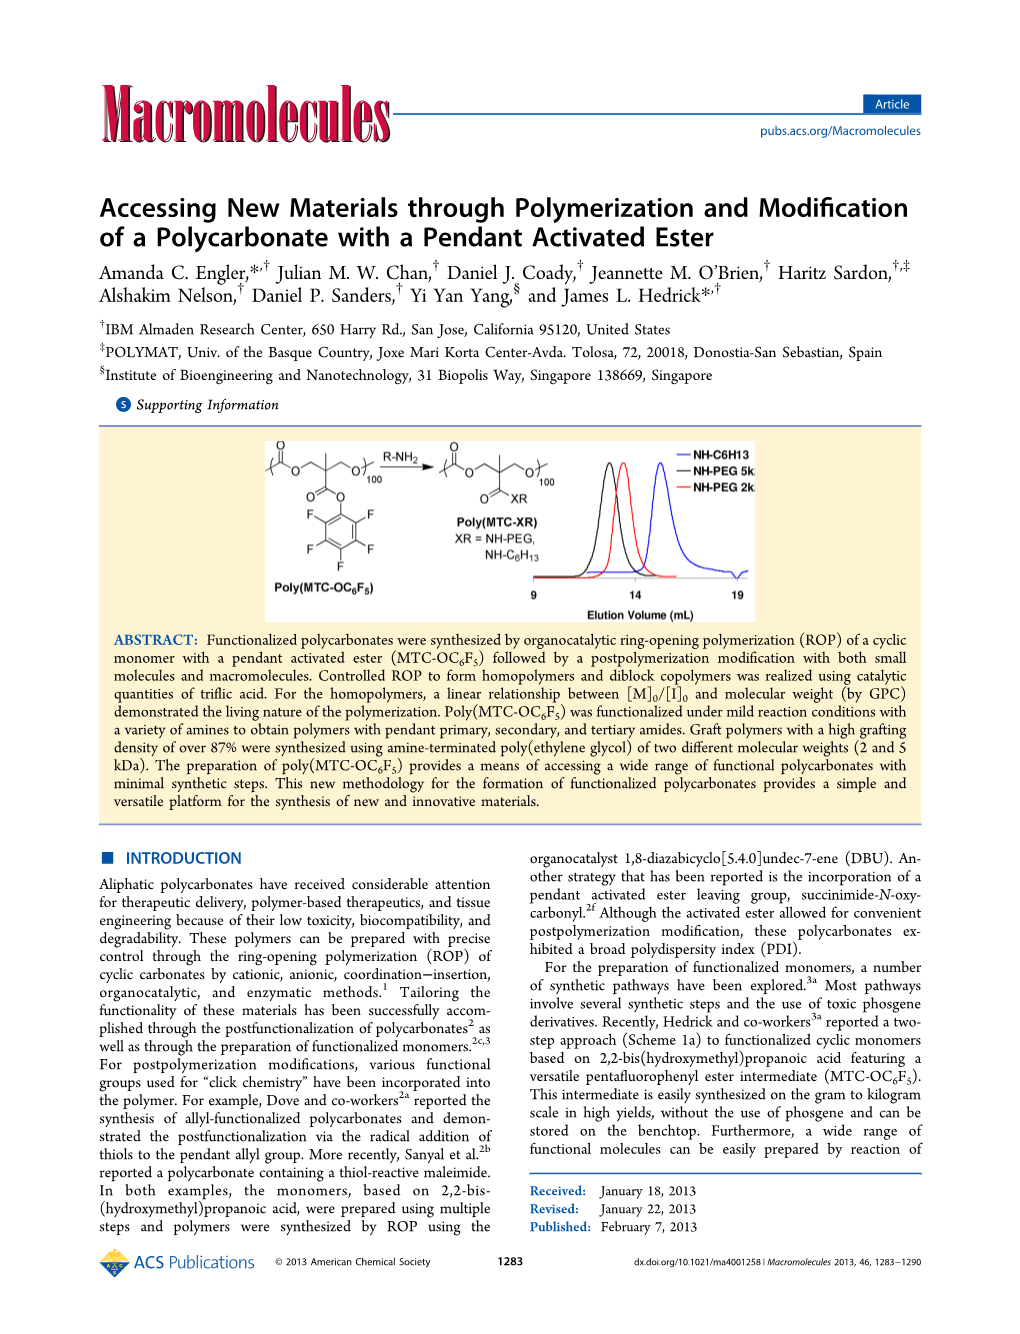 Accessing New Materials Through Polymerization and Modification Of